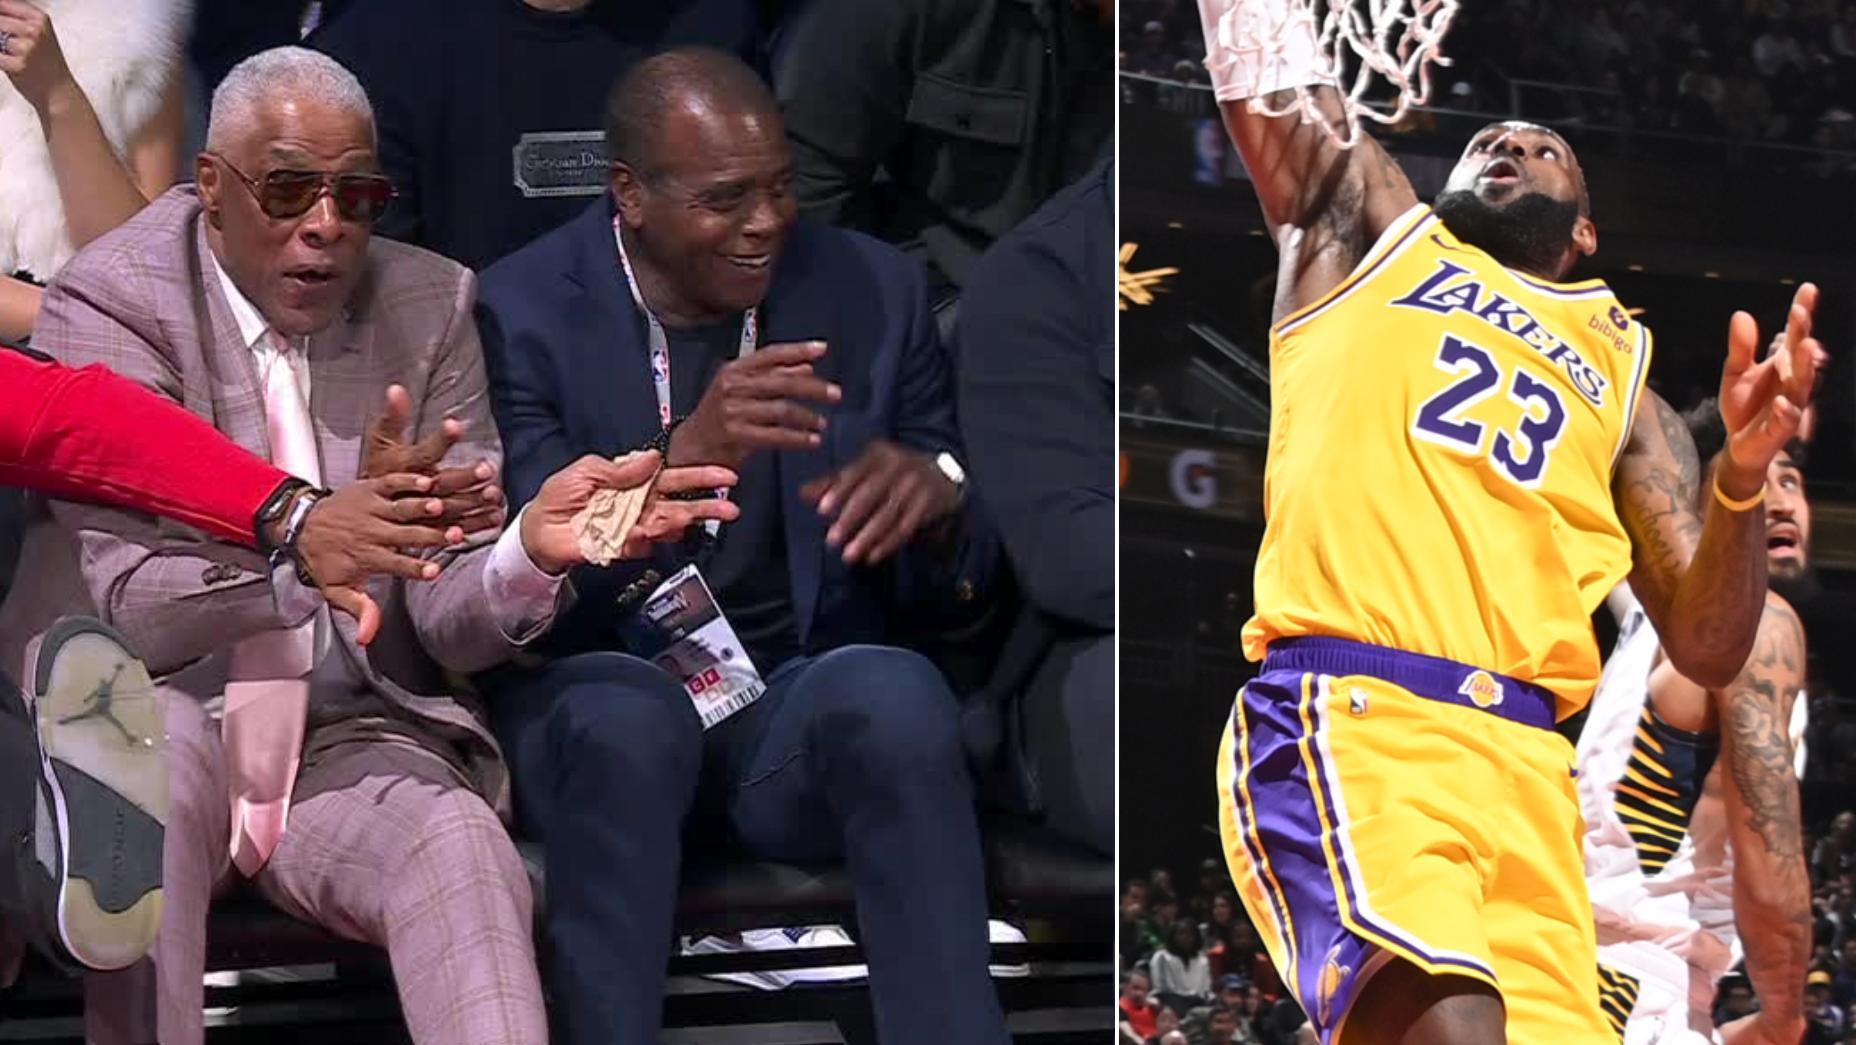 LeBron's double-clutch slam gets Dr. J hyped